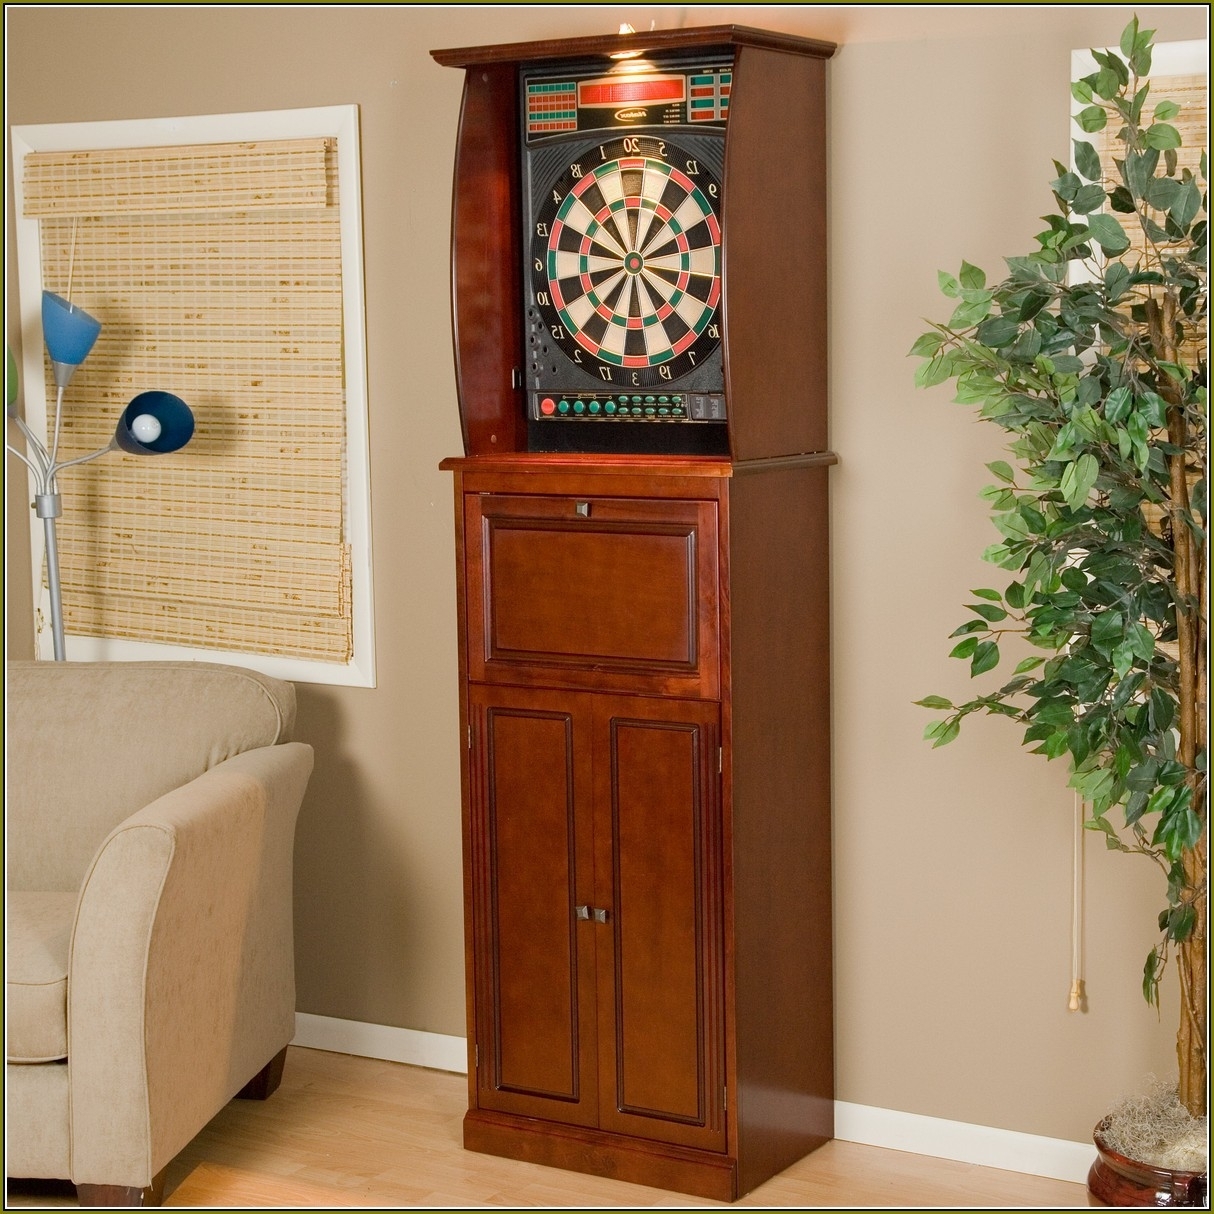 Halex Madison Bristletech Electronic Dart Board With Contemporary Cabinet